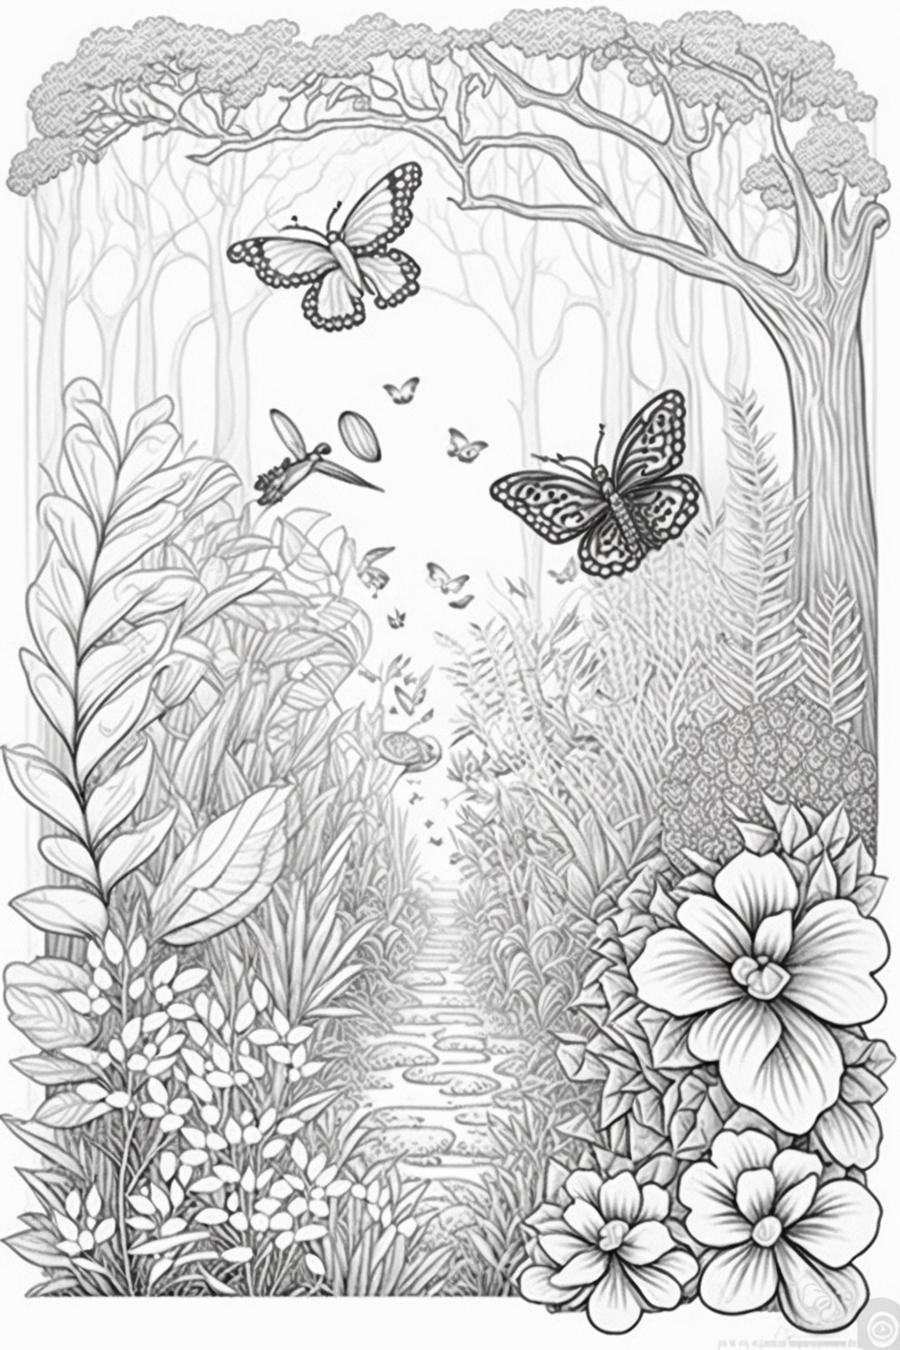 A black and white drawing of a forest with butterflies and flowers.